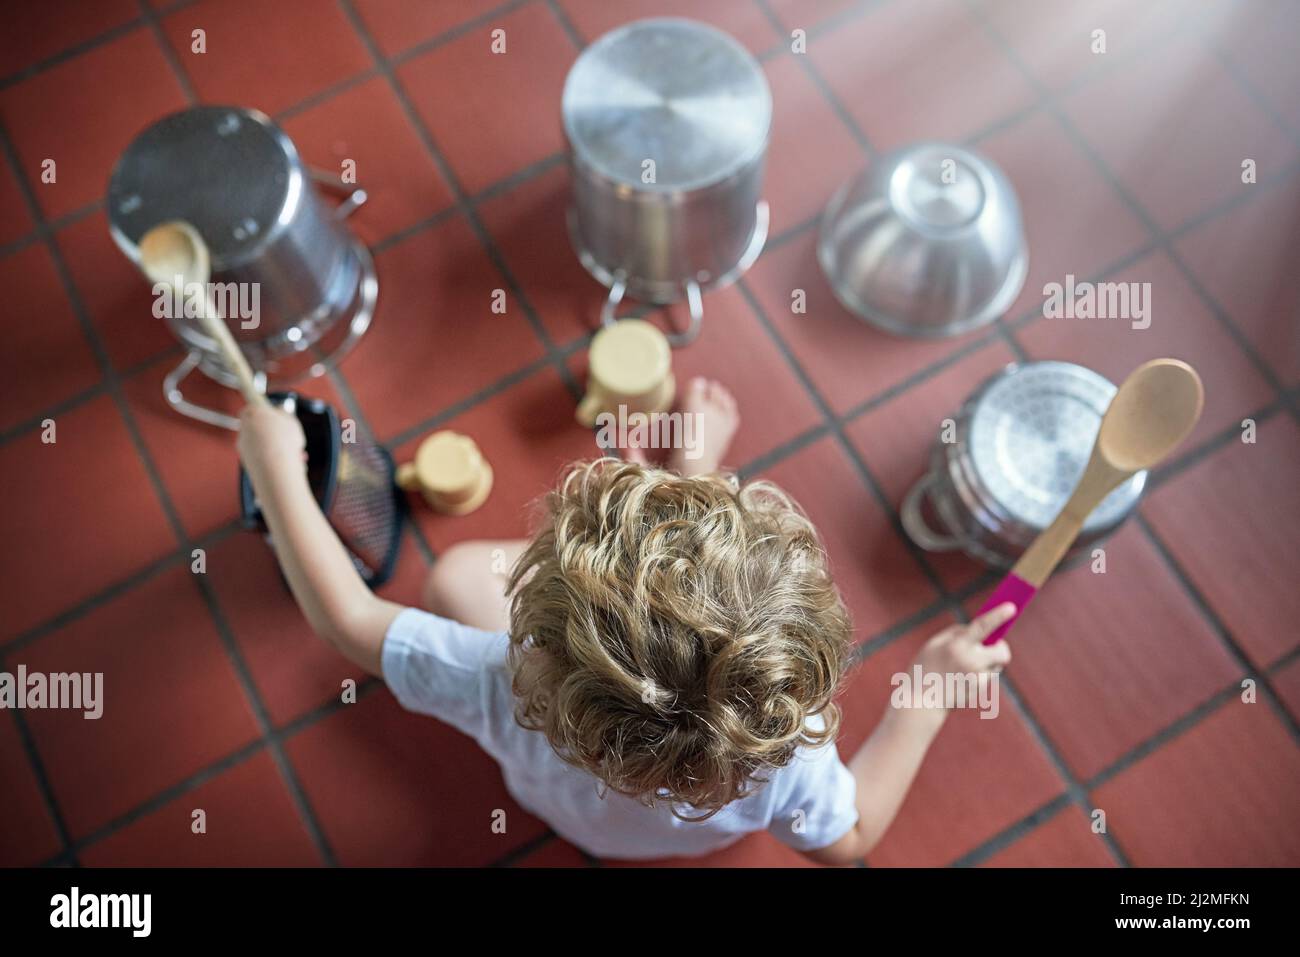 Showing off his drumming skills. High angle shot of an adorable little boy playing drums on a set of pots in the kitchen. Stock Photo